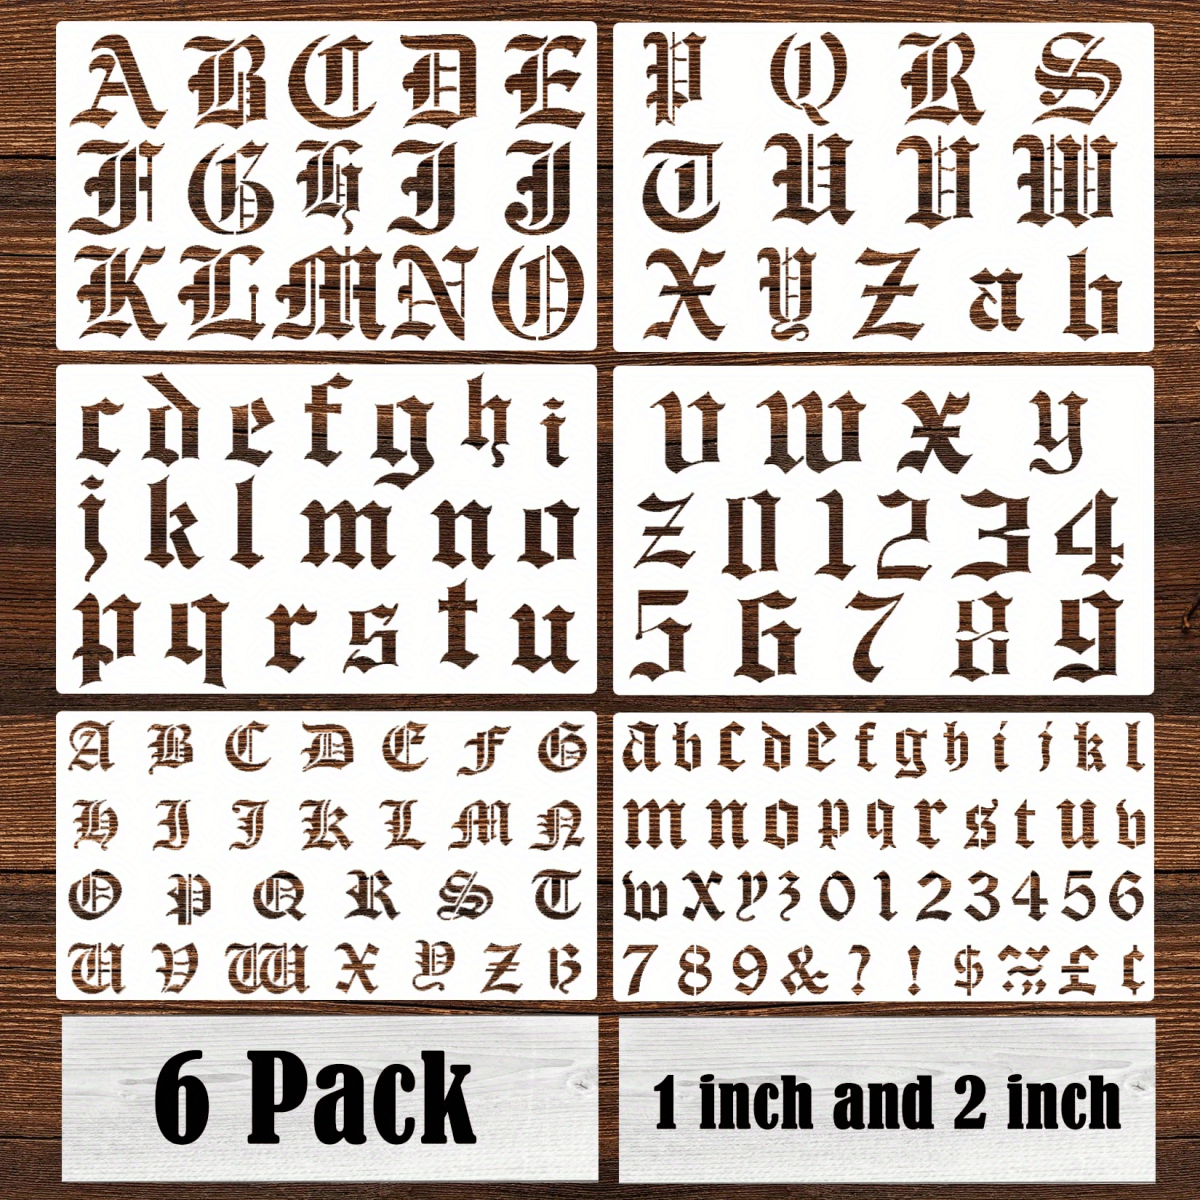 3 Inch Old English Lettering Stencils for Painting, 67 Pcs Calligraphy  Letter Stencils Reusable Alphabet Letters Numbers Signs Drawing Templates